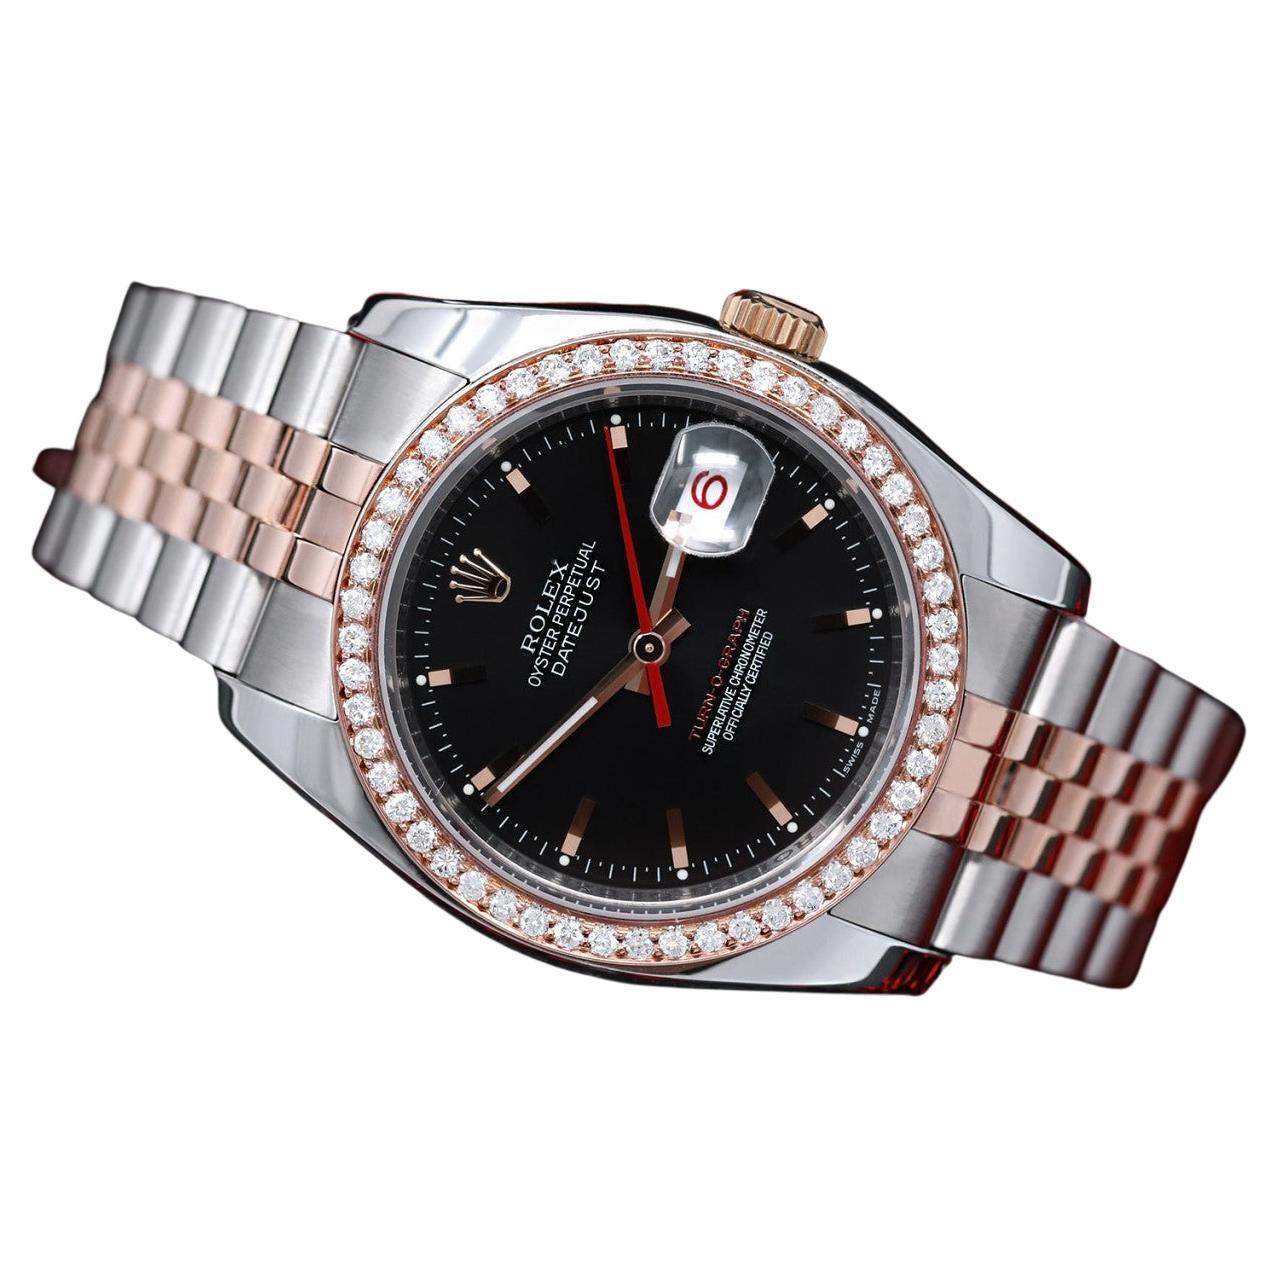 Rolex Datejust Turn-o-graph 116261 Two Tone Stainless Steen and Rose Gold Watch For Sale